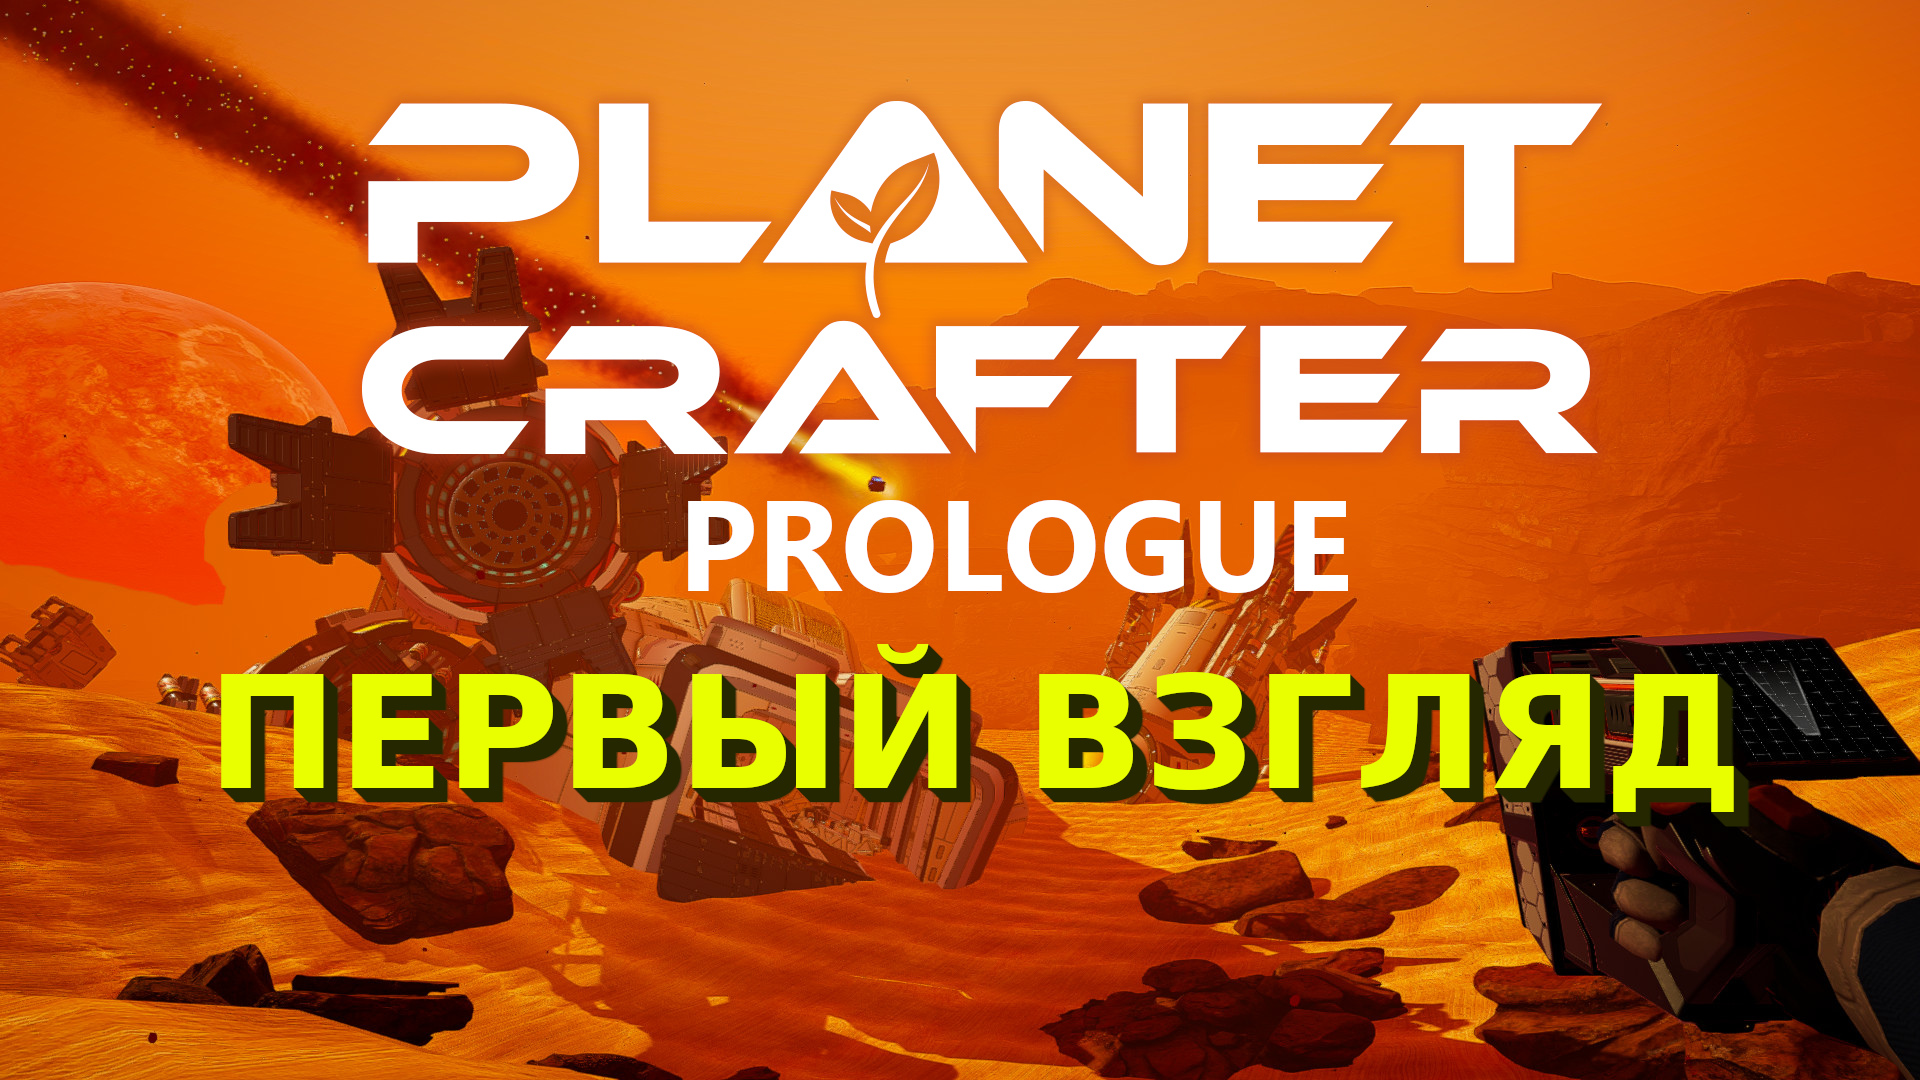 The planet crafter читы. The Planet Crafter: Prologue. The Planet Crafter.